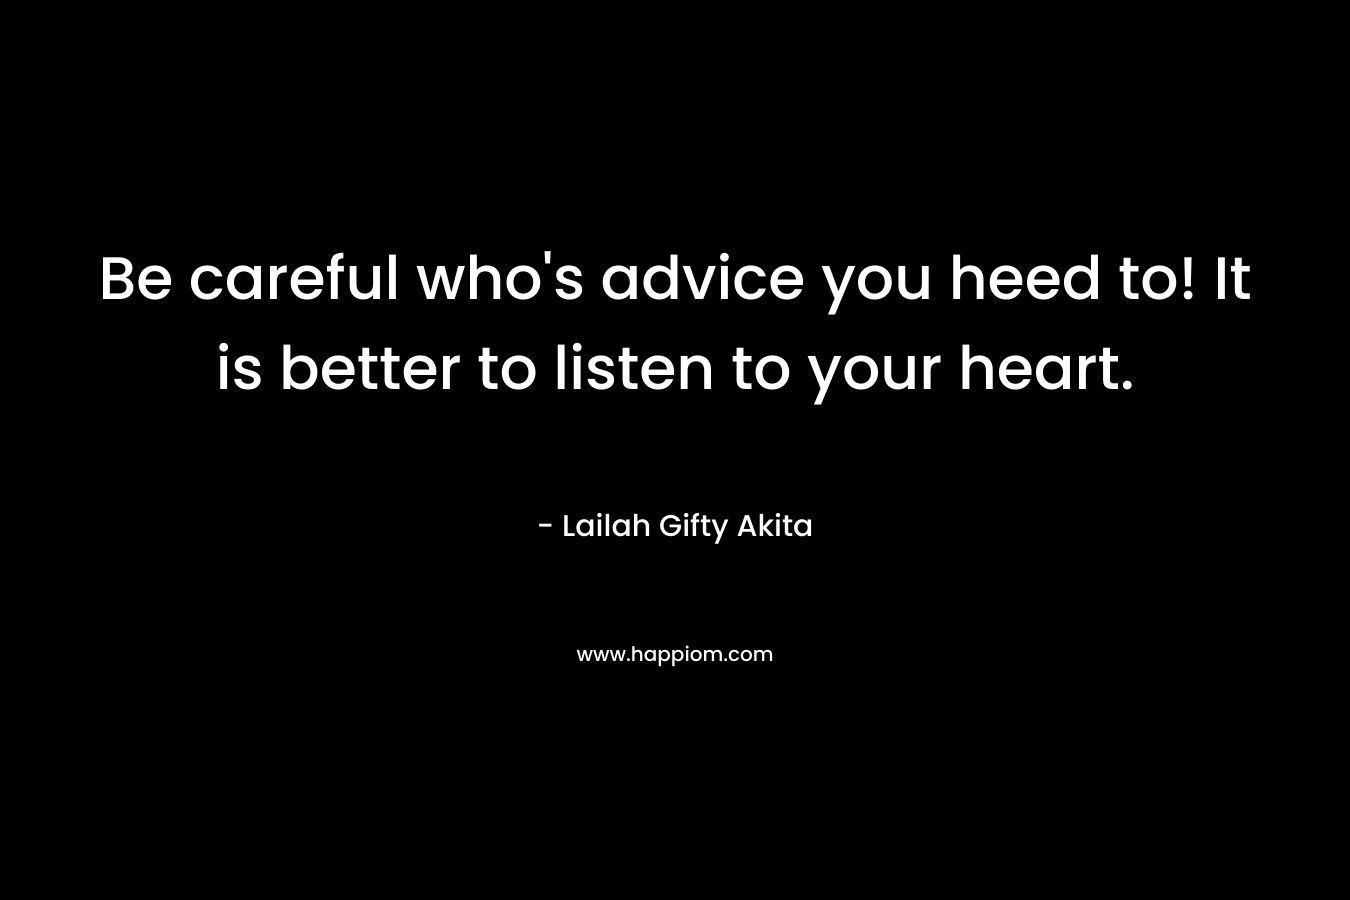 Be careful who’s advice you heed to! It is better to listen to your heart. – Lailah Gifty Akita